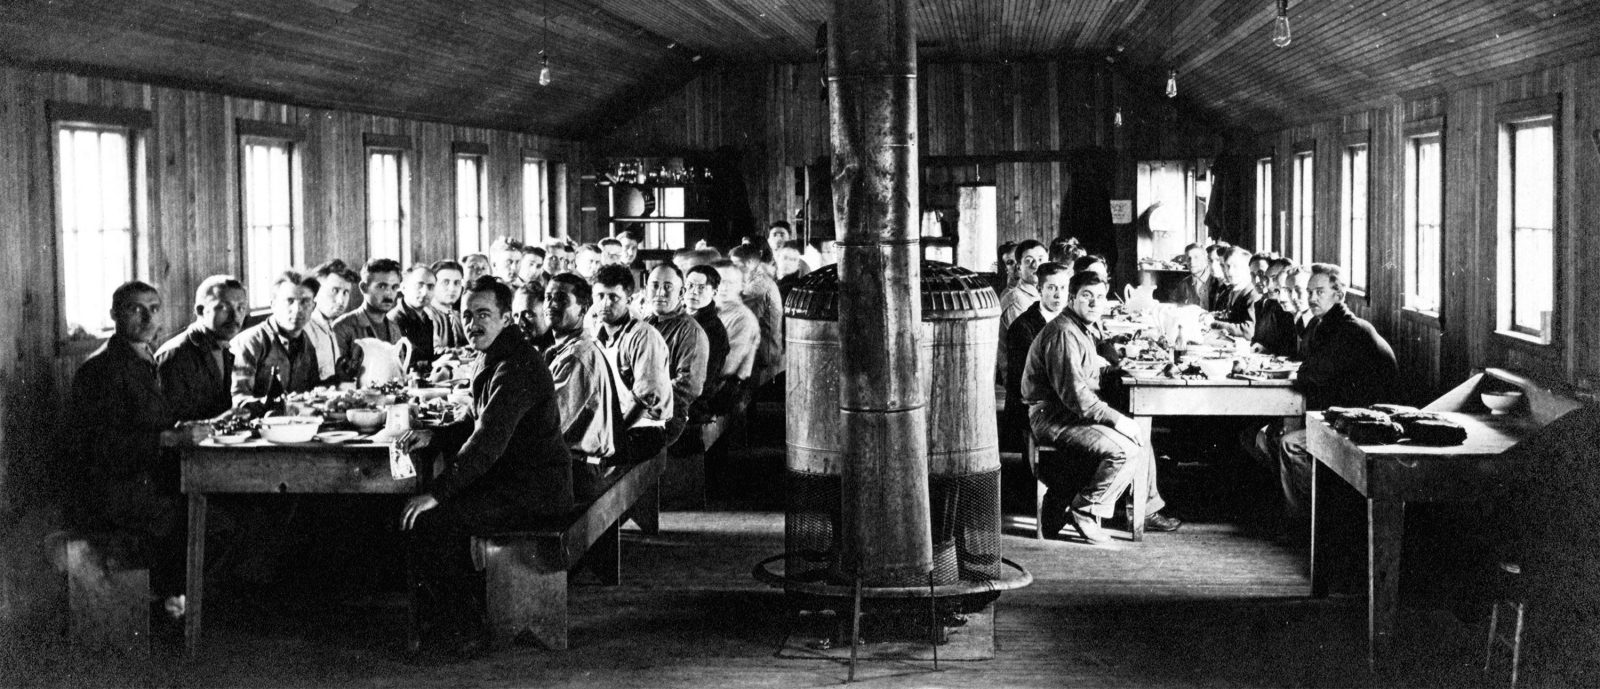 Men gathered for Thanksgiving in 1919 in the Conscientious Objector Prison Camp dining hall at Fort Douglas, Utah.  Photo courtesy of Swarthmore College Peace Collection.